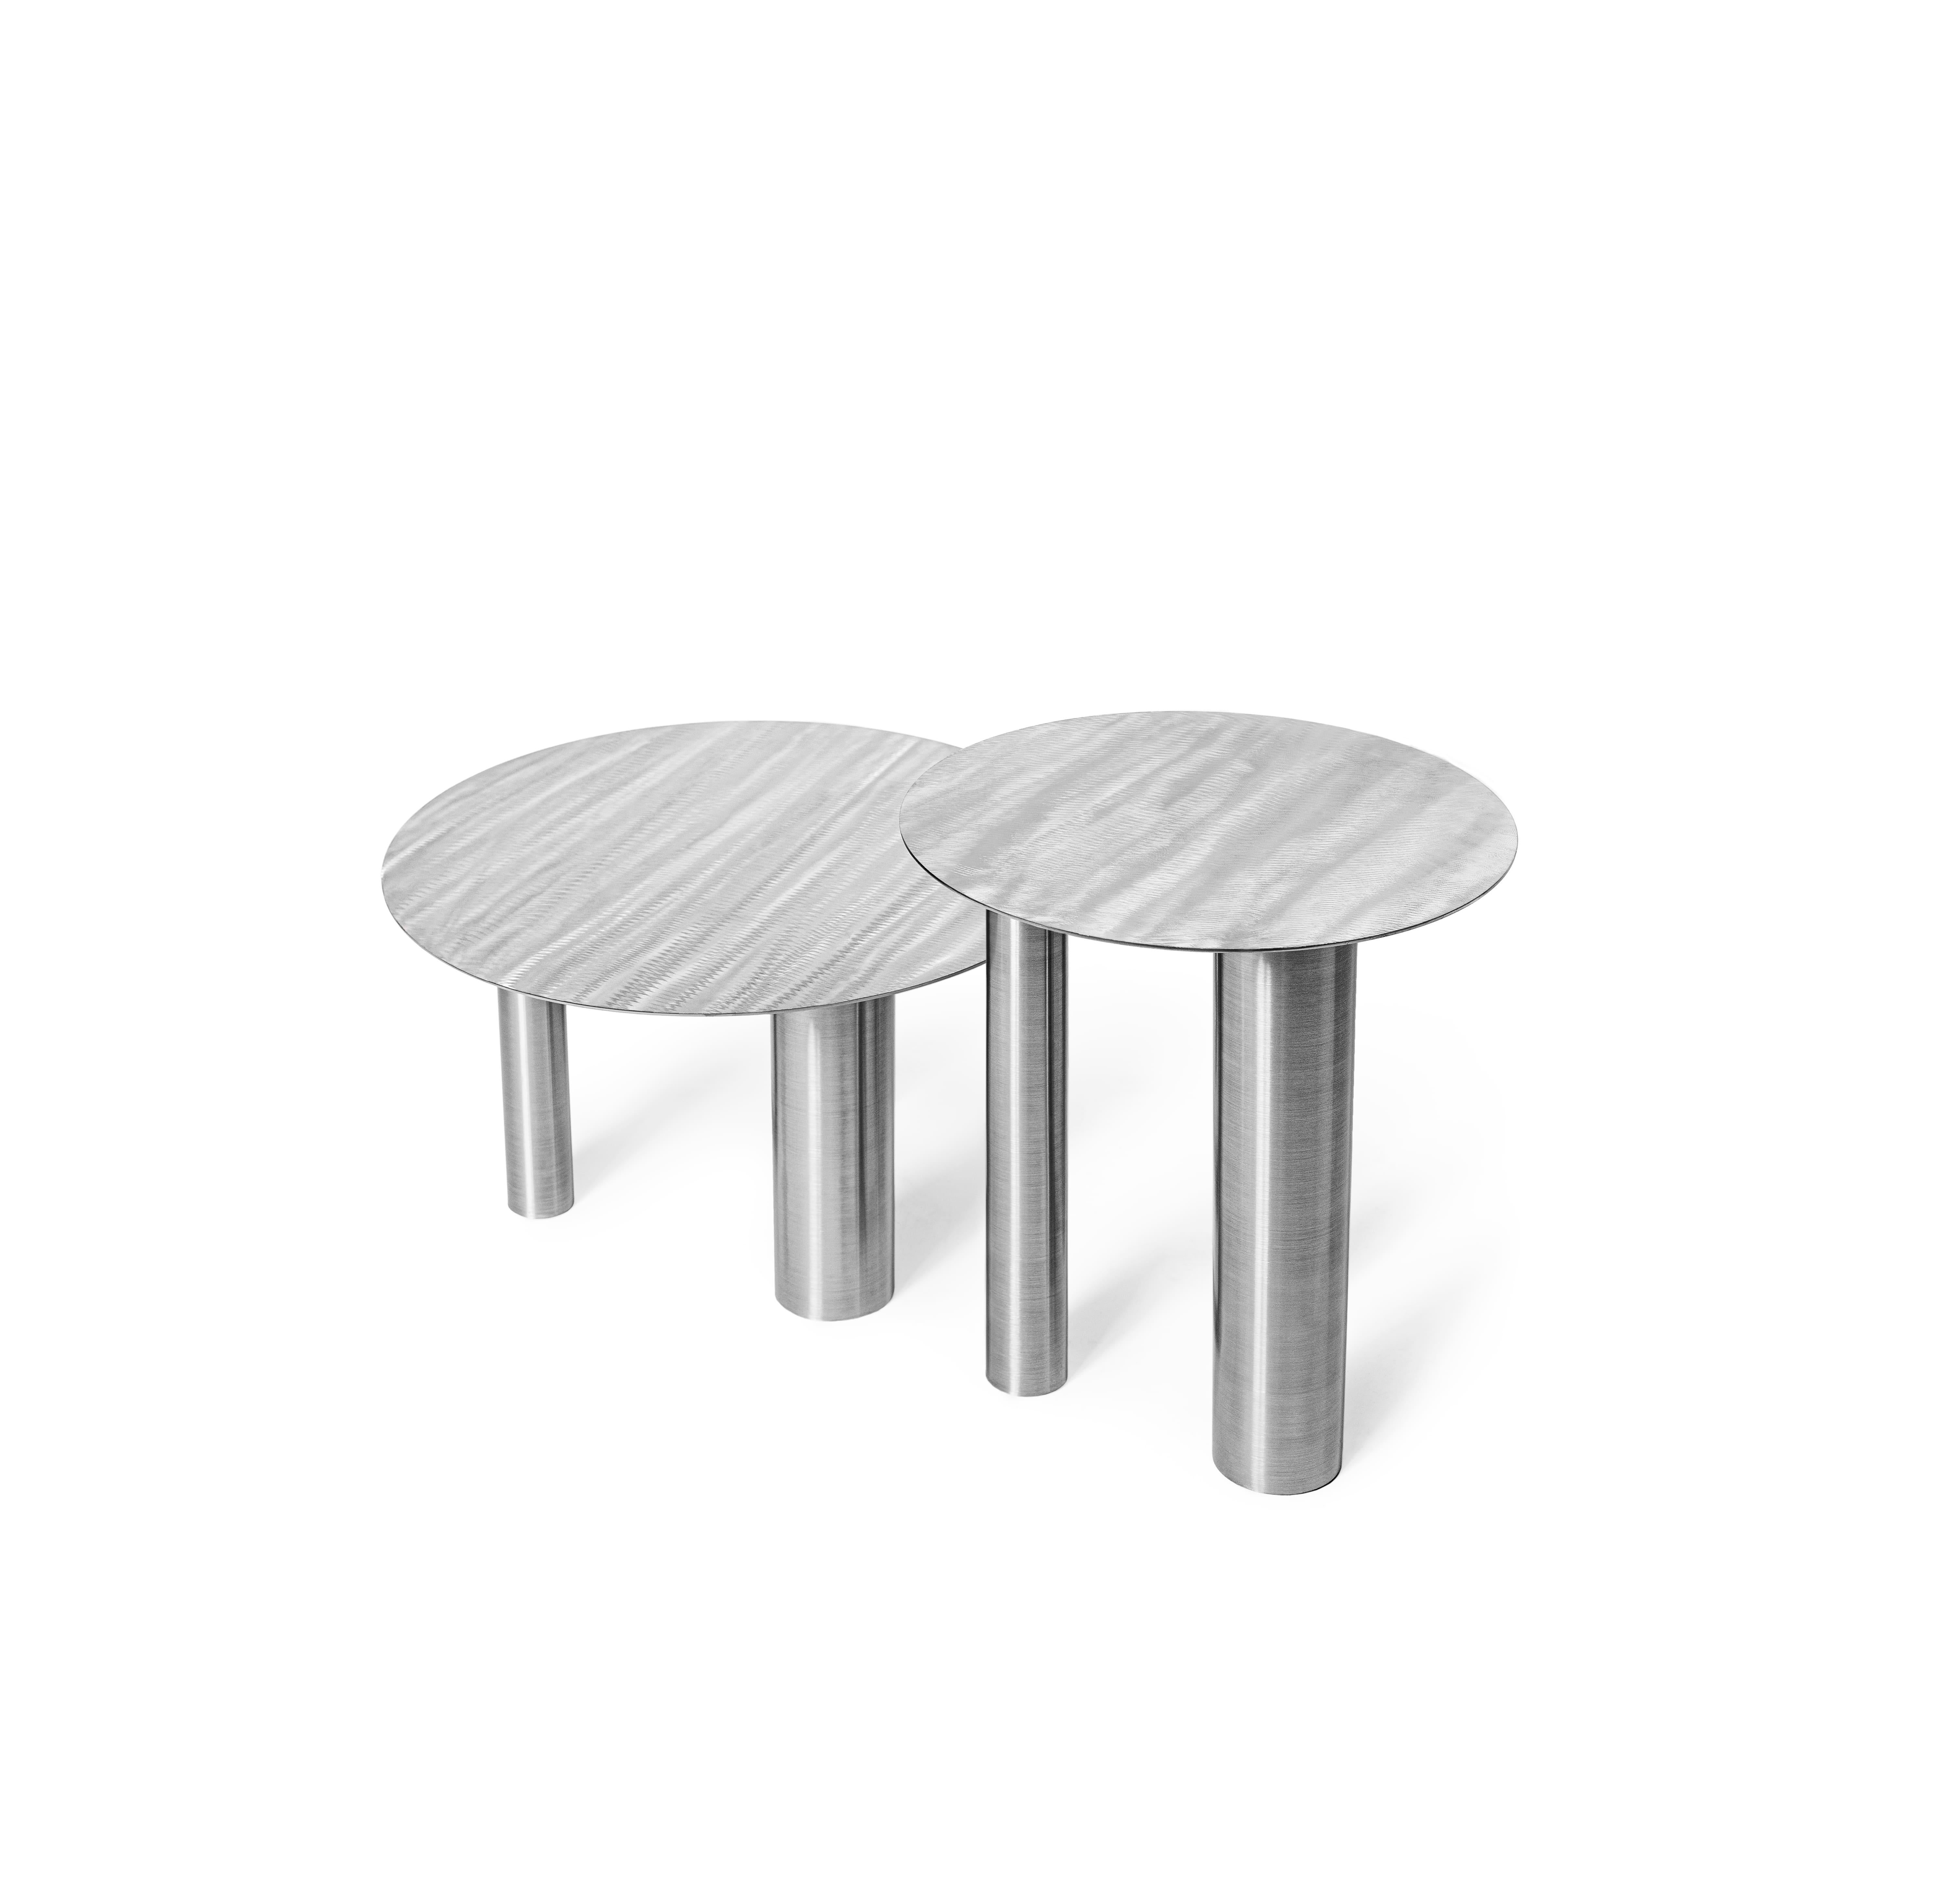 Set of Two Modern Coffee Tables Brandt CS1 made of Stainless Steel by NOOM 7